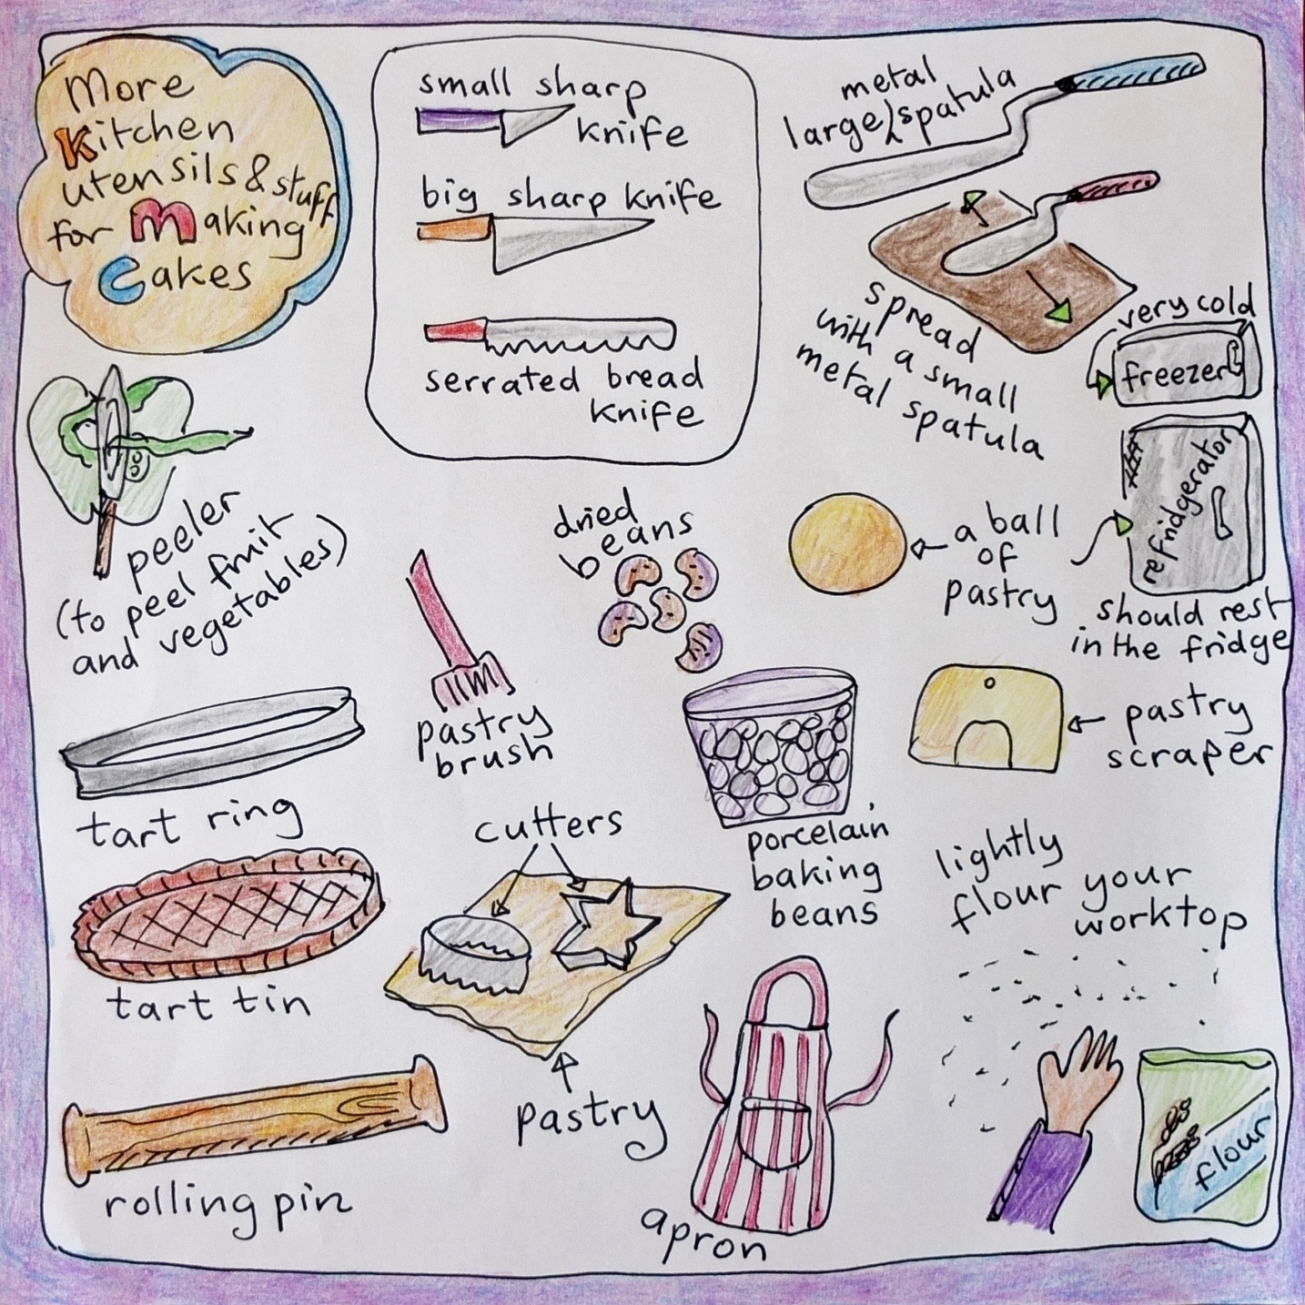 More kitchen utensils and stuff for making cakes (baking picture dictionary)